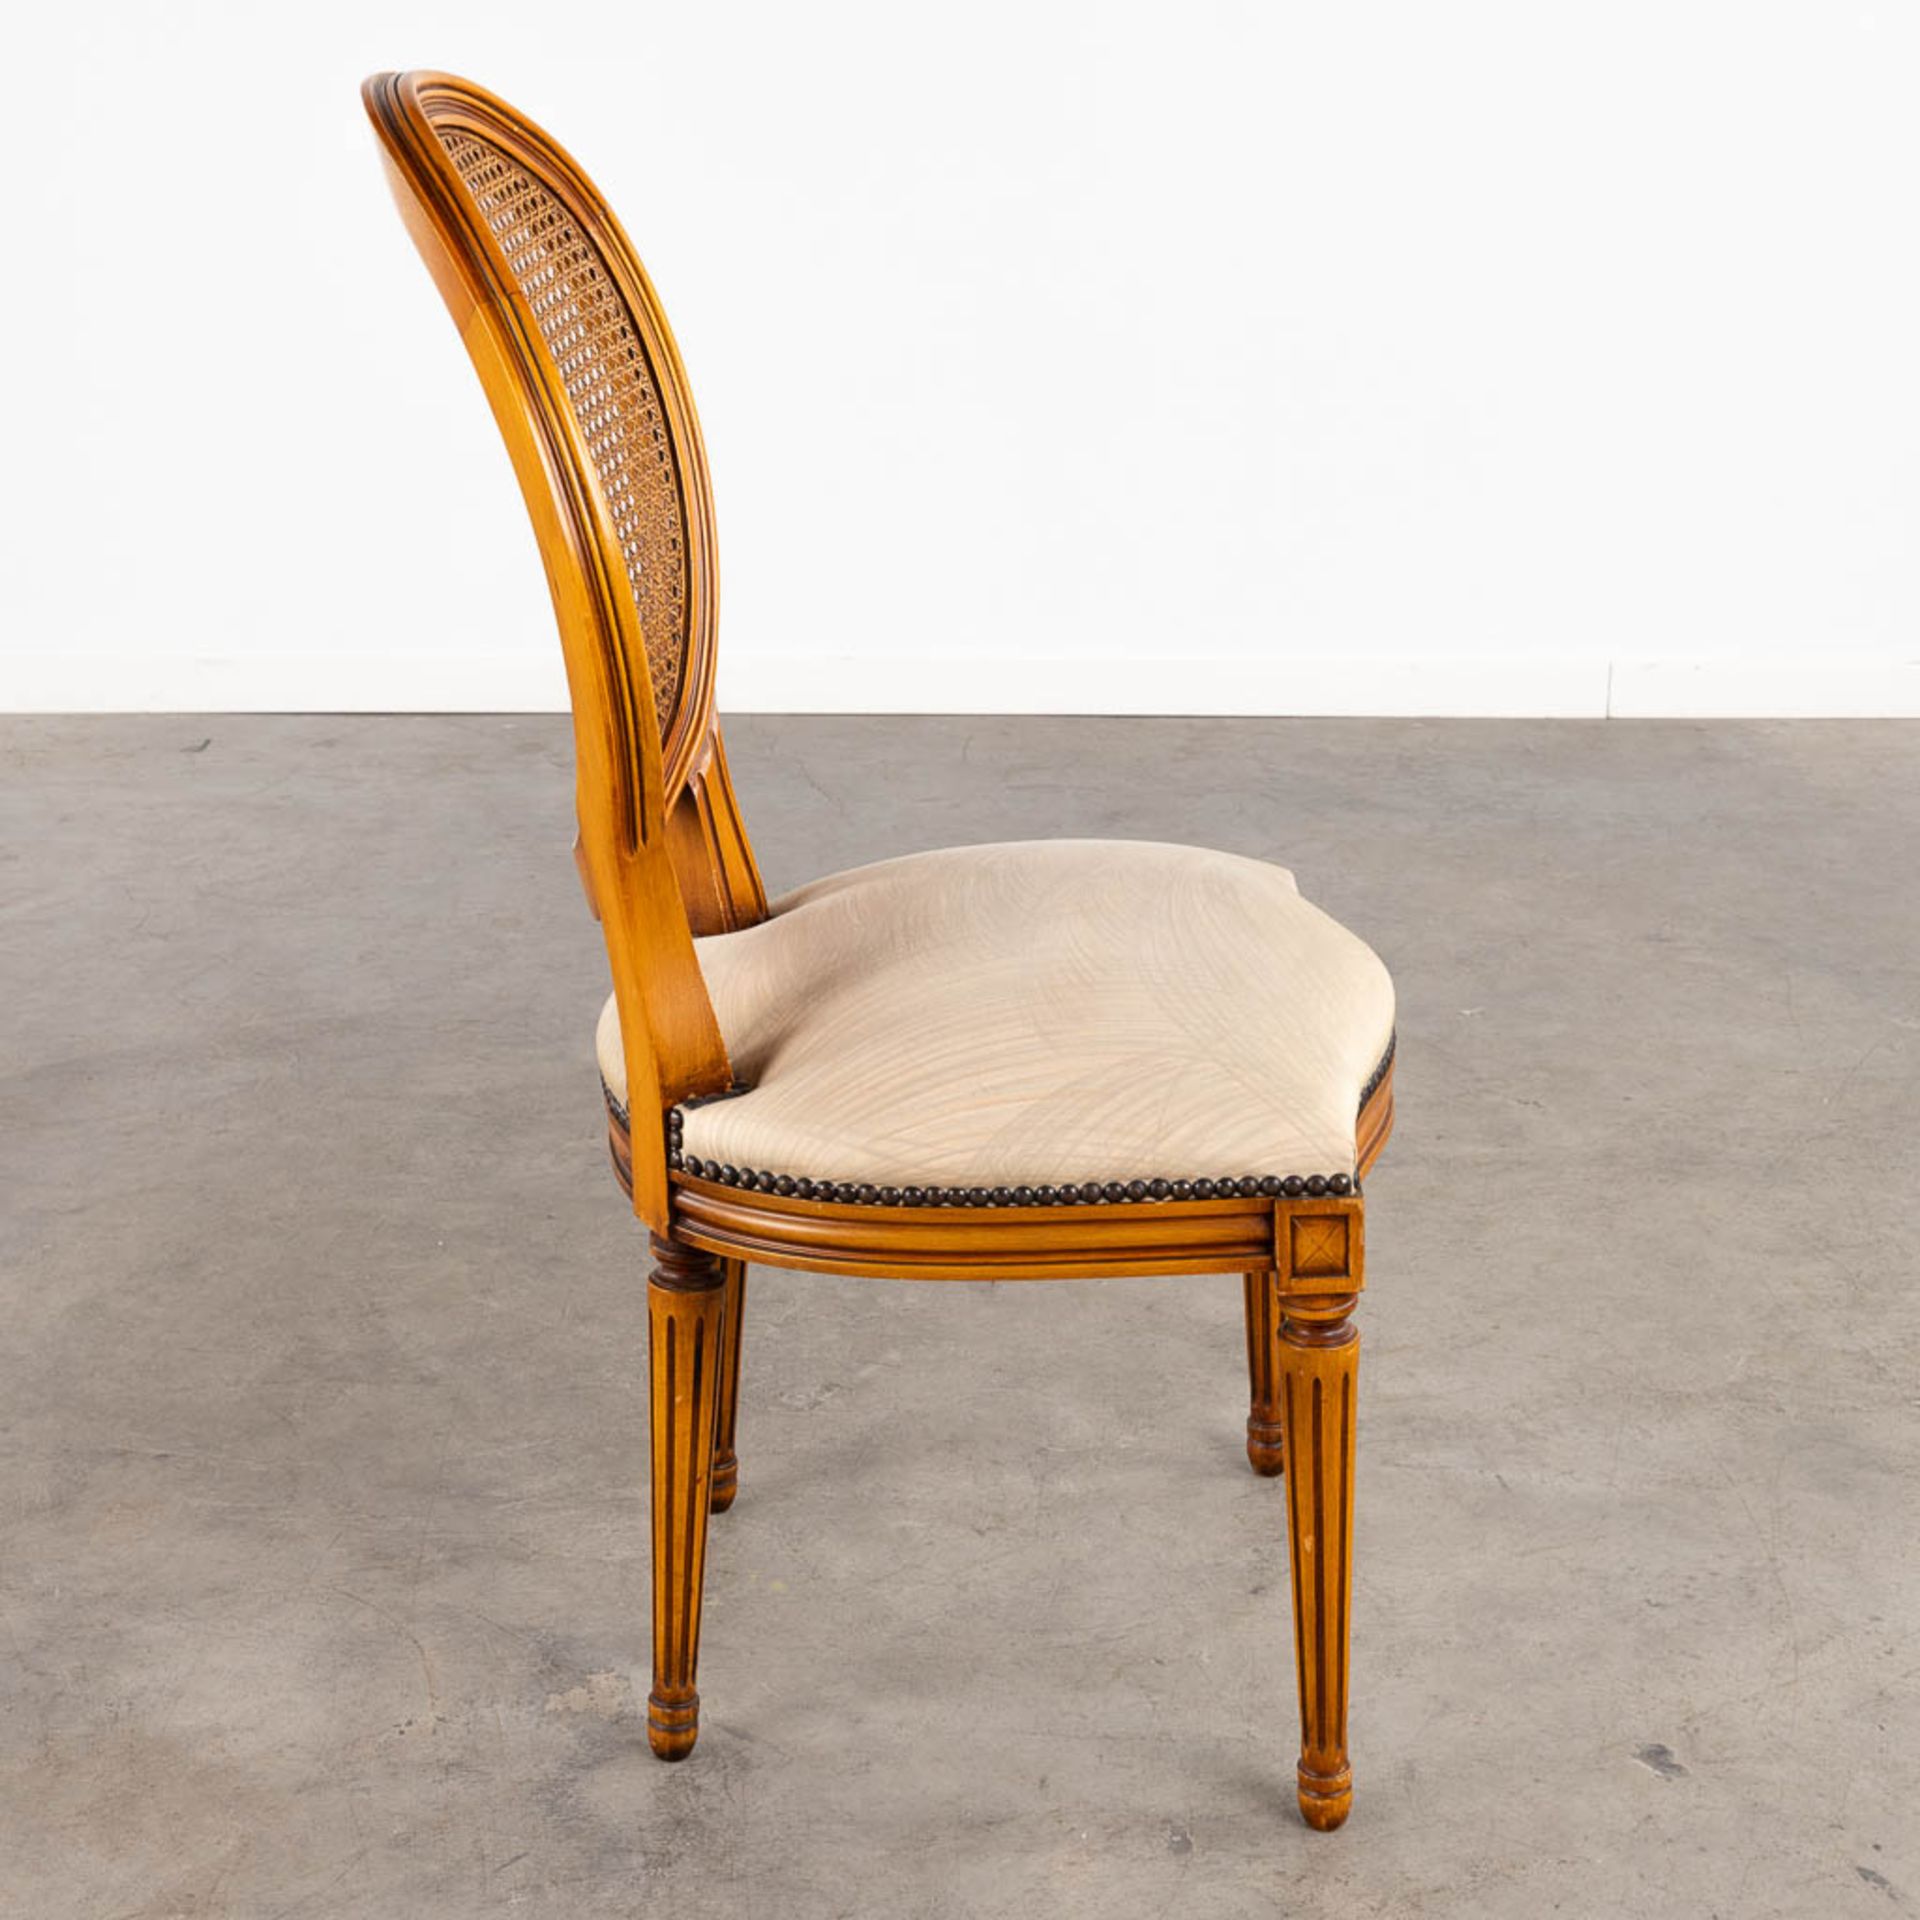 Giorgetti, 8 chairs, Louis XVI style finished with caning. (D:48 x W:48 x H:95 cm) - Image 9 of 13